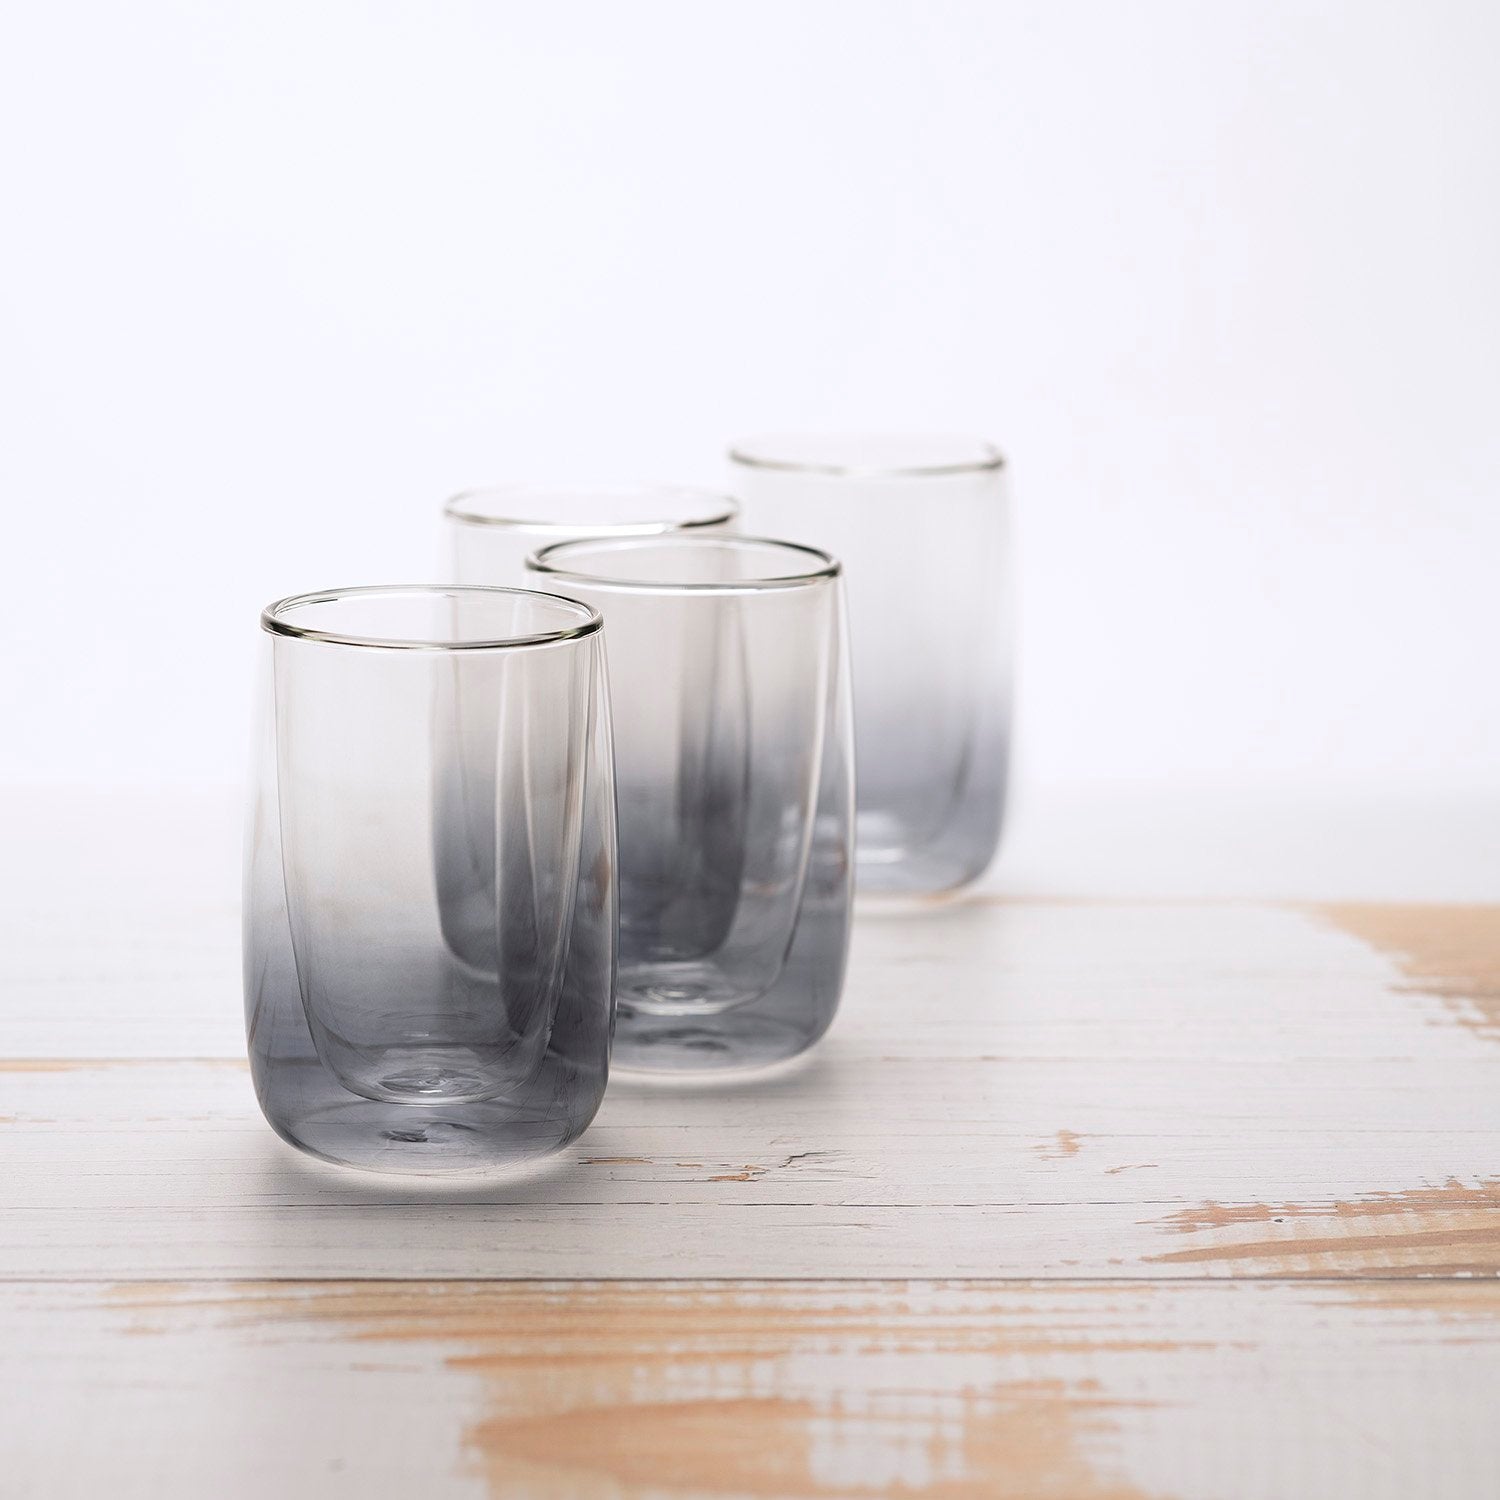 Four glass cups on a table